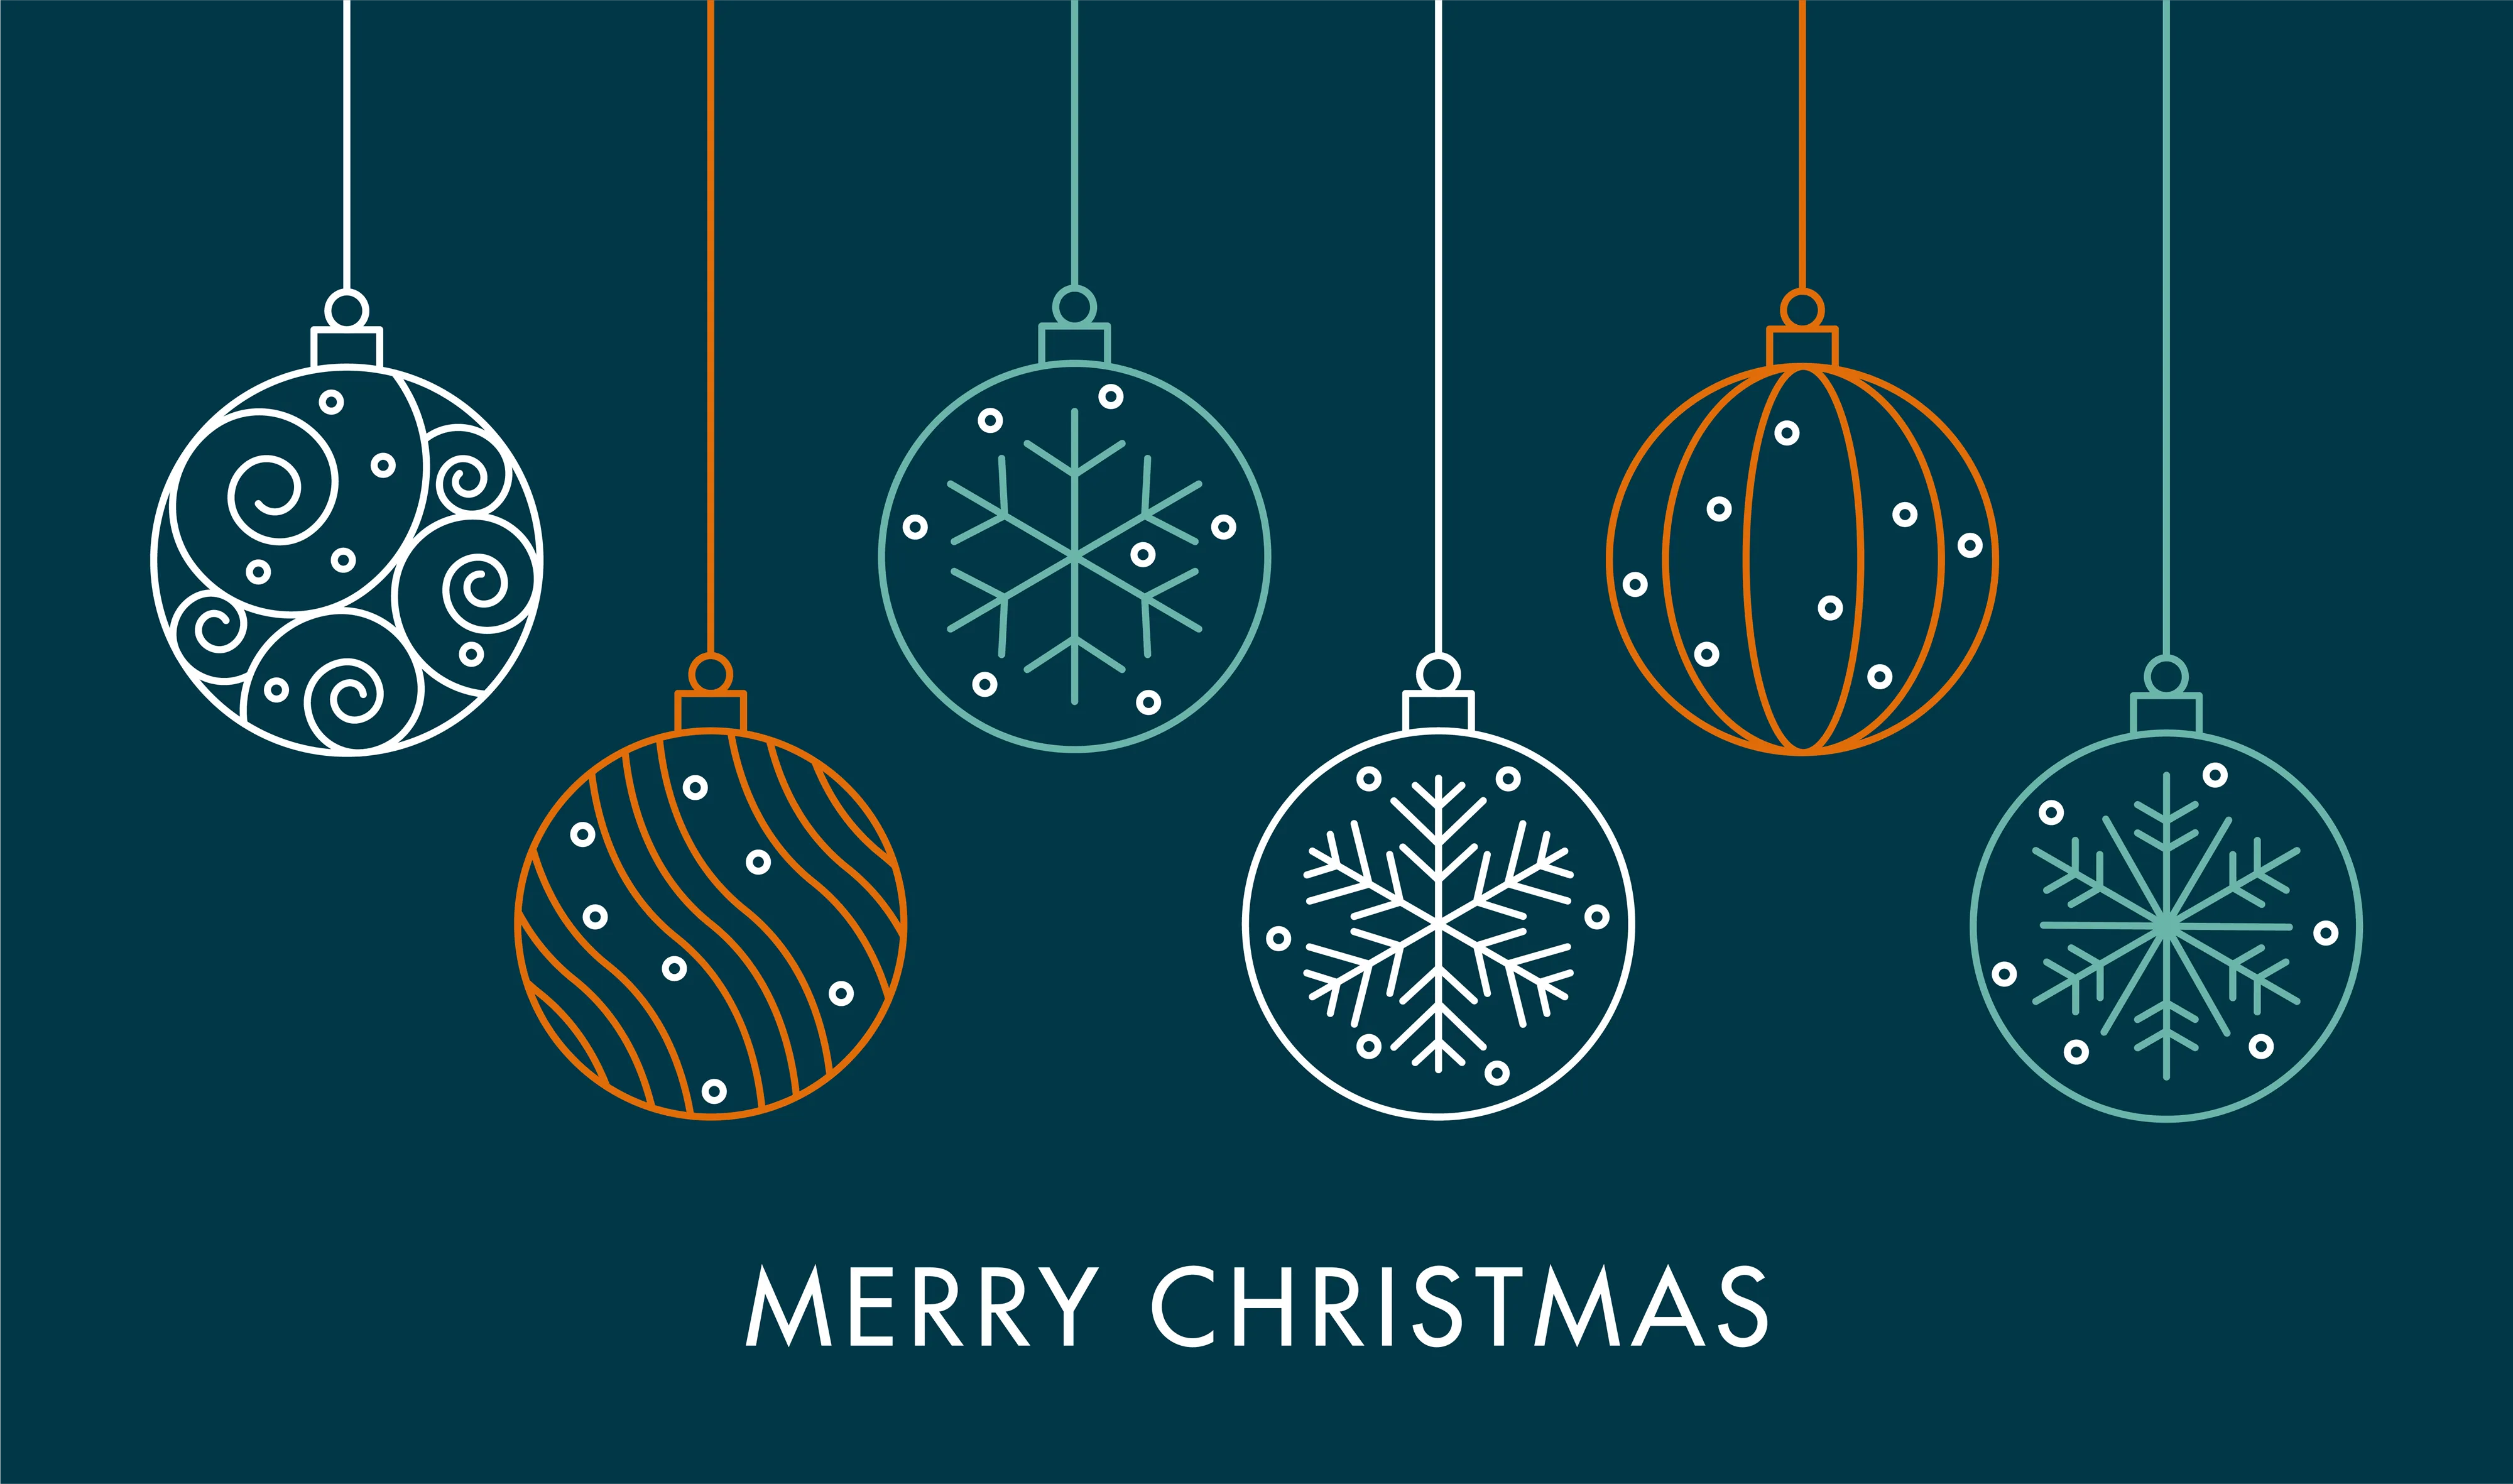 Edward Cooke Family Law wish you a Merry Christmas